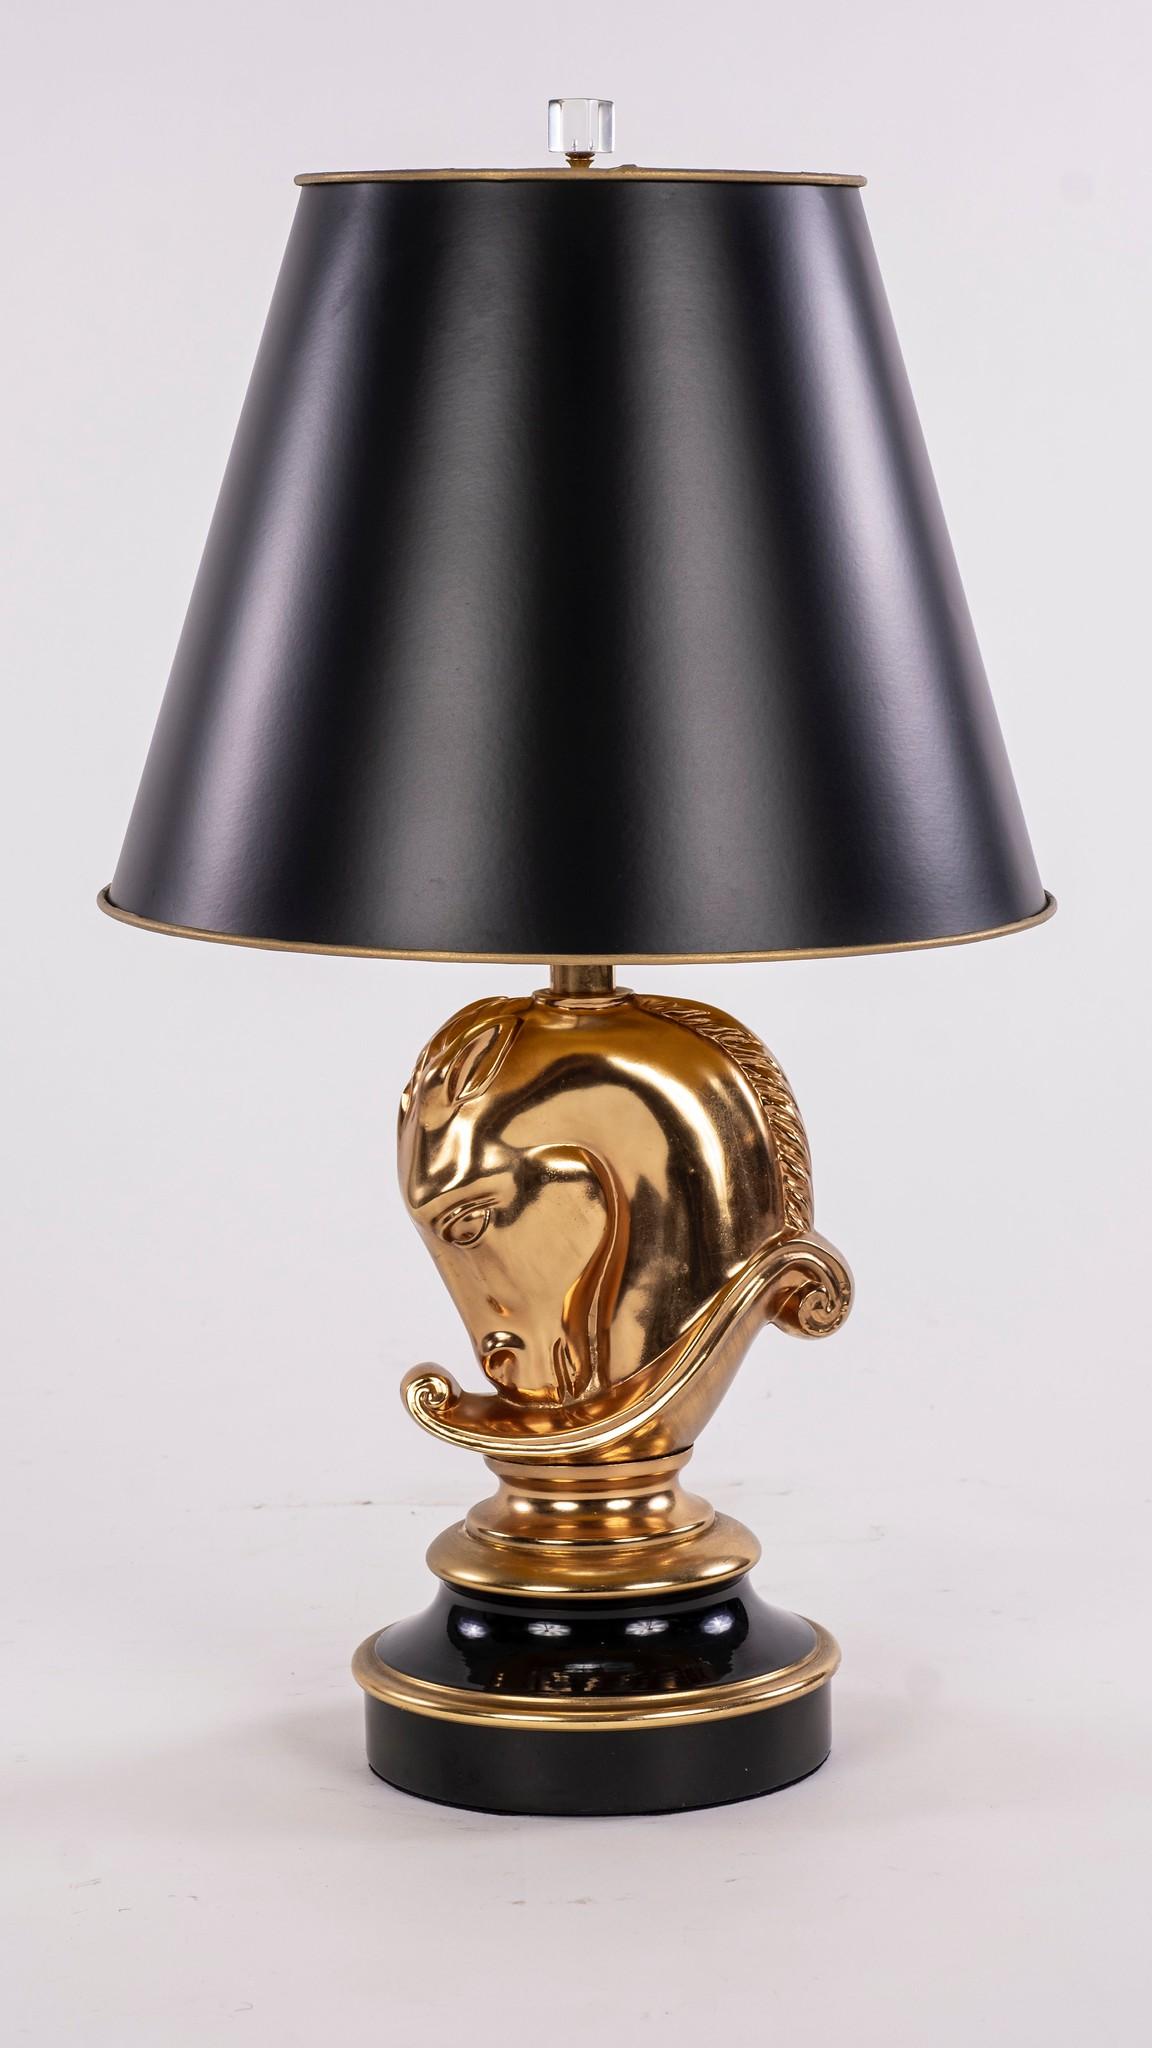 Early 20th century gilt horse head ceramic lamp with black shade. Newly electrified.